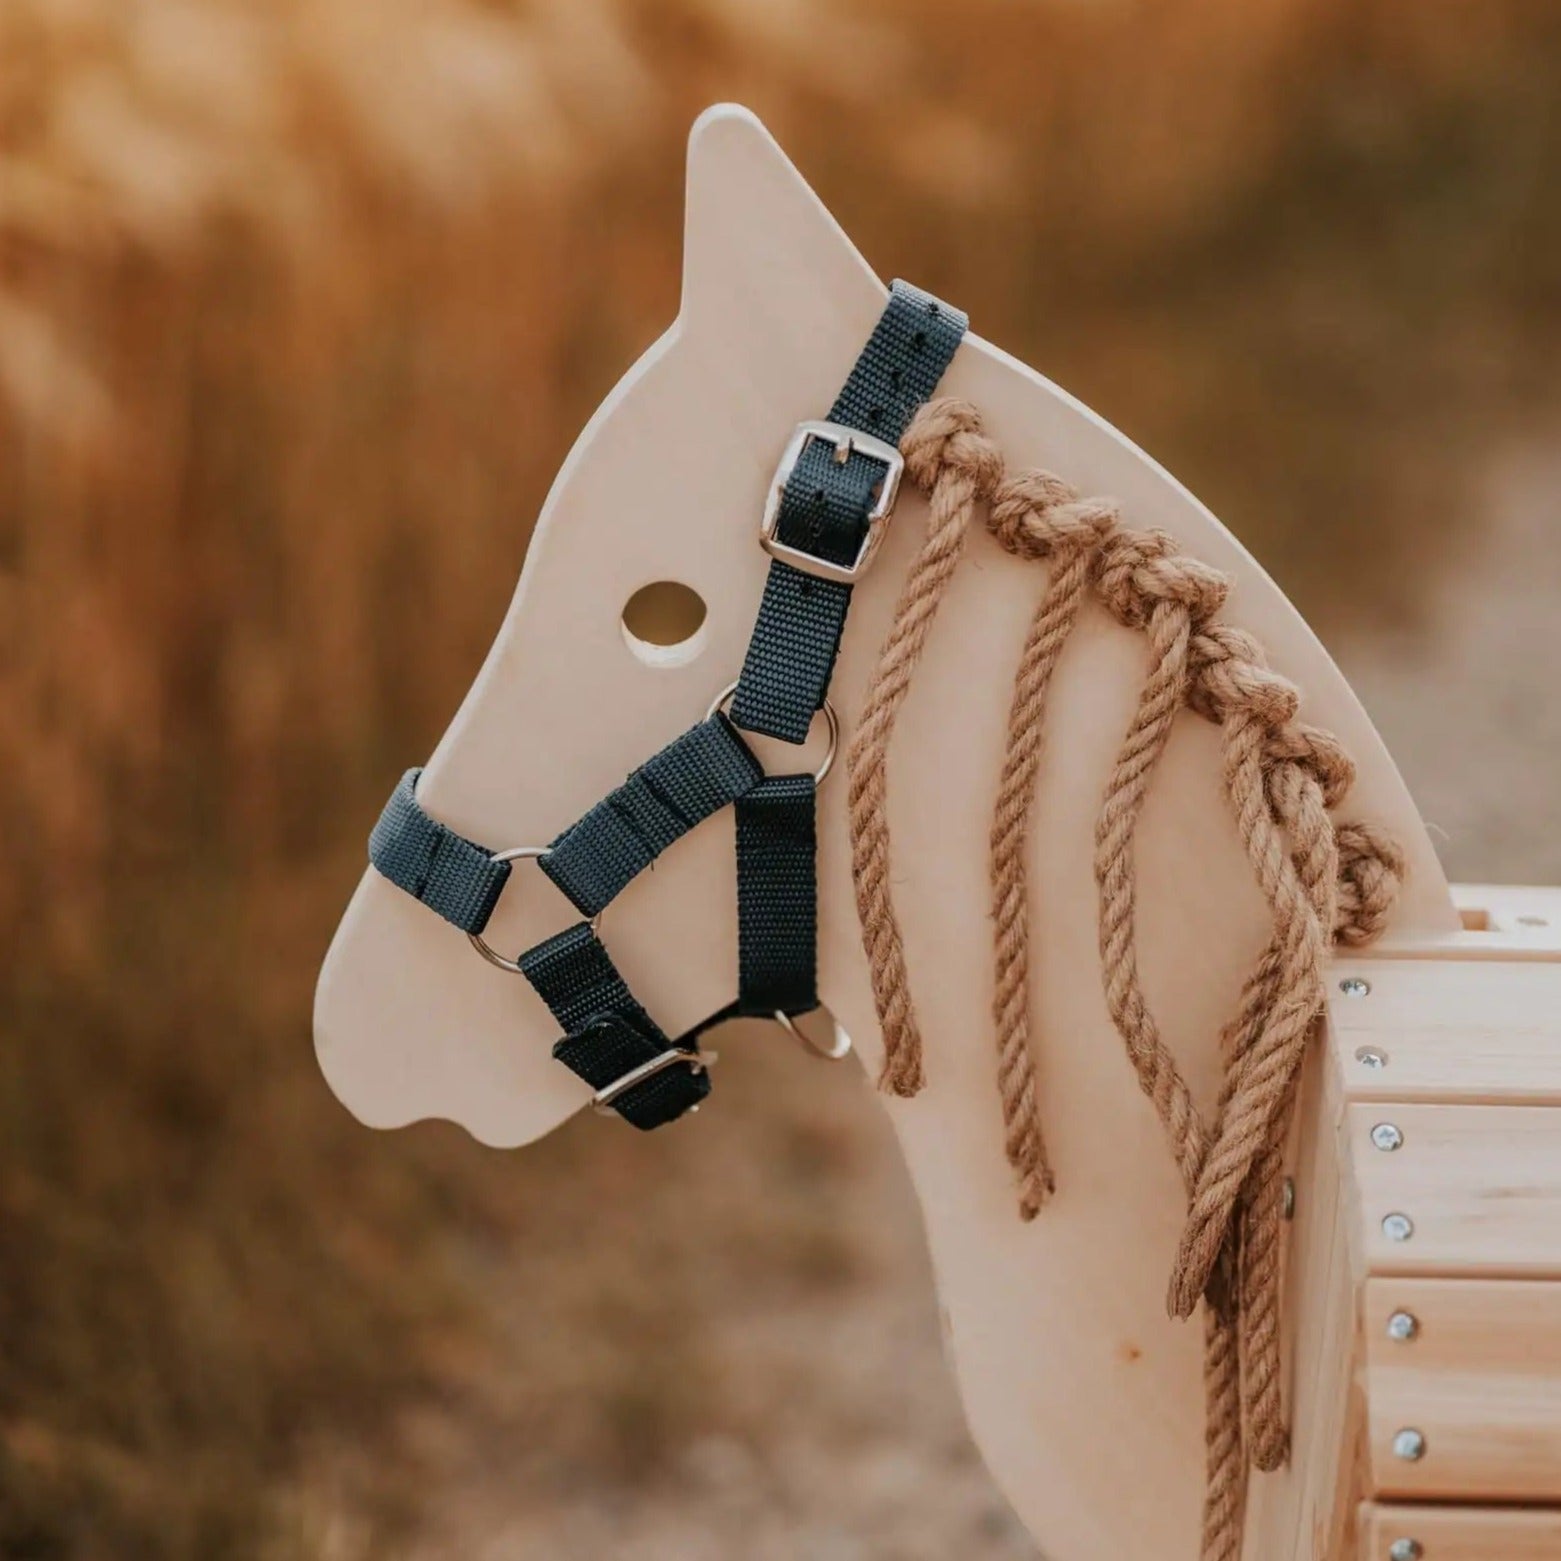 Small foot: a wooden compact horse for children outdoor